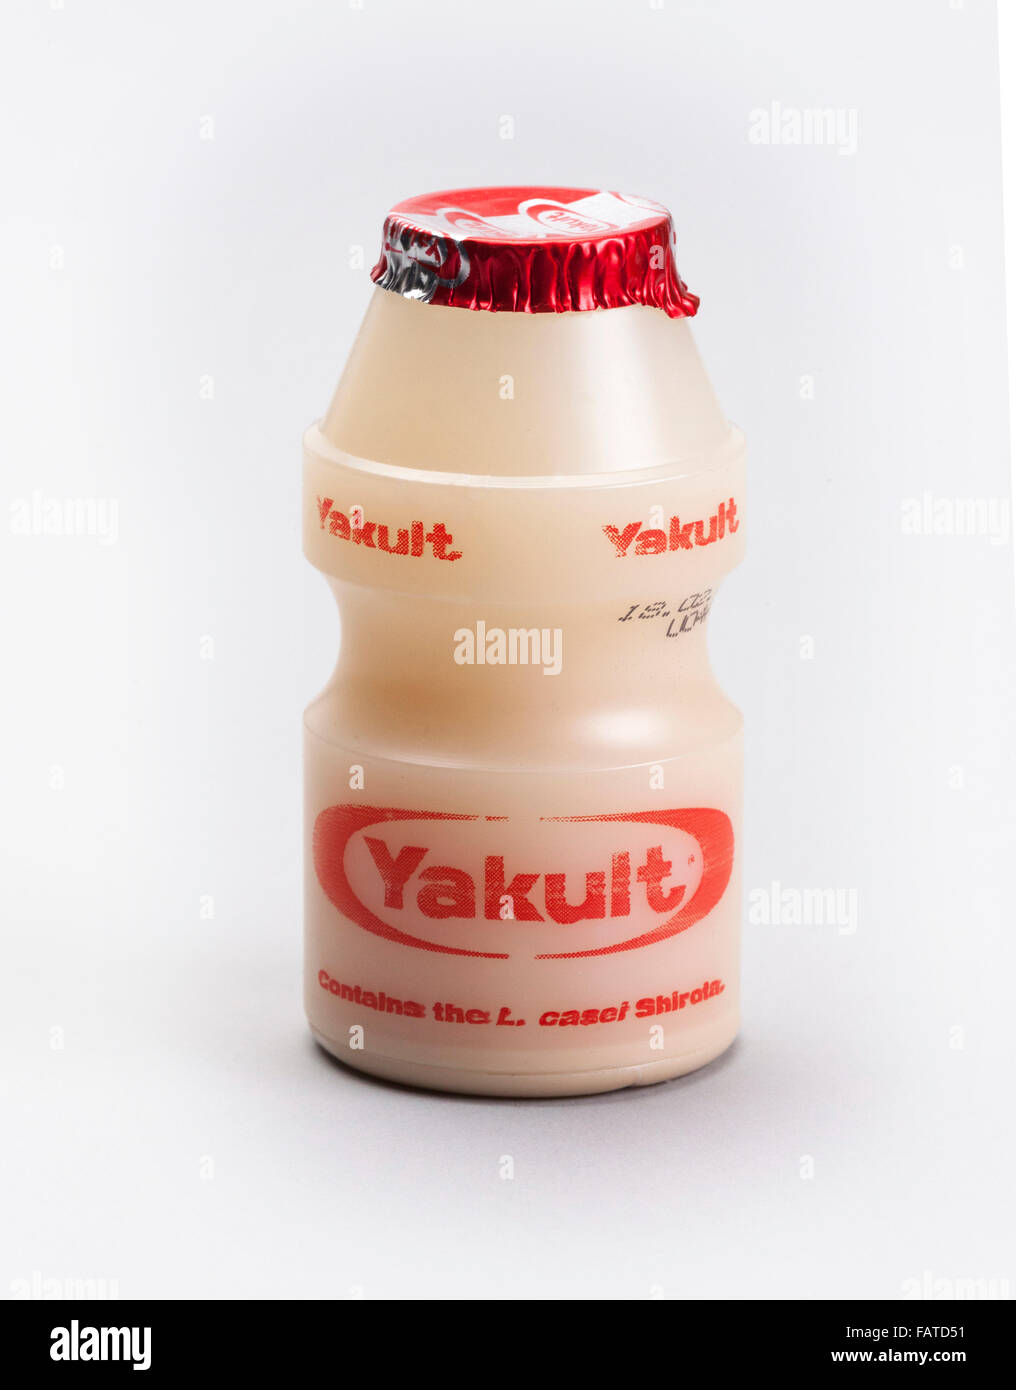 Yakult probiotic dairy product Stock Photo